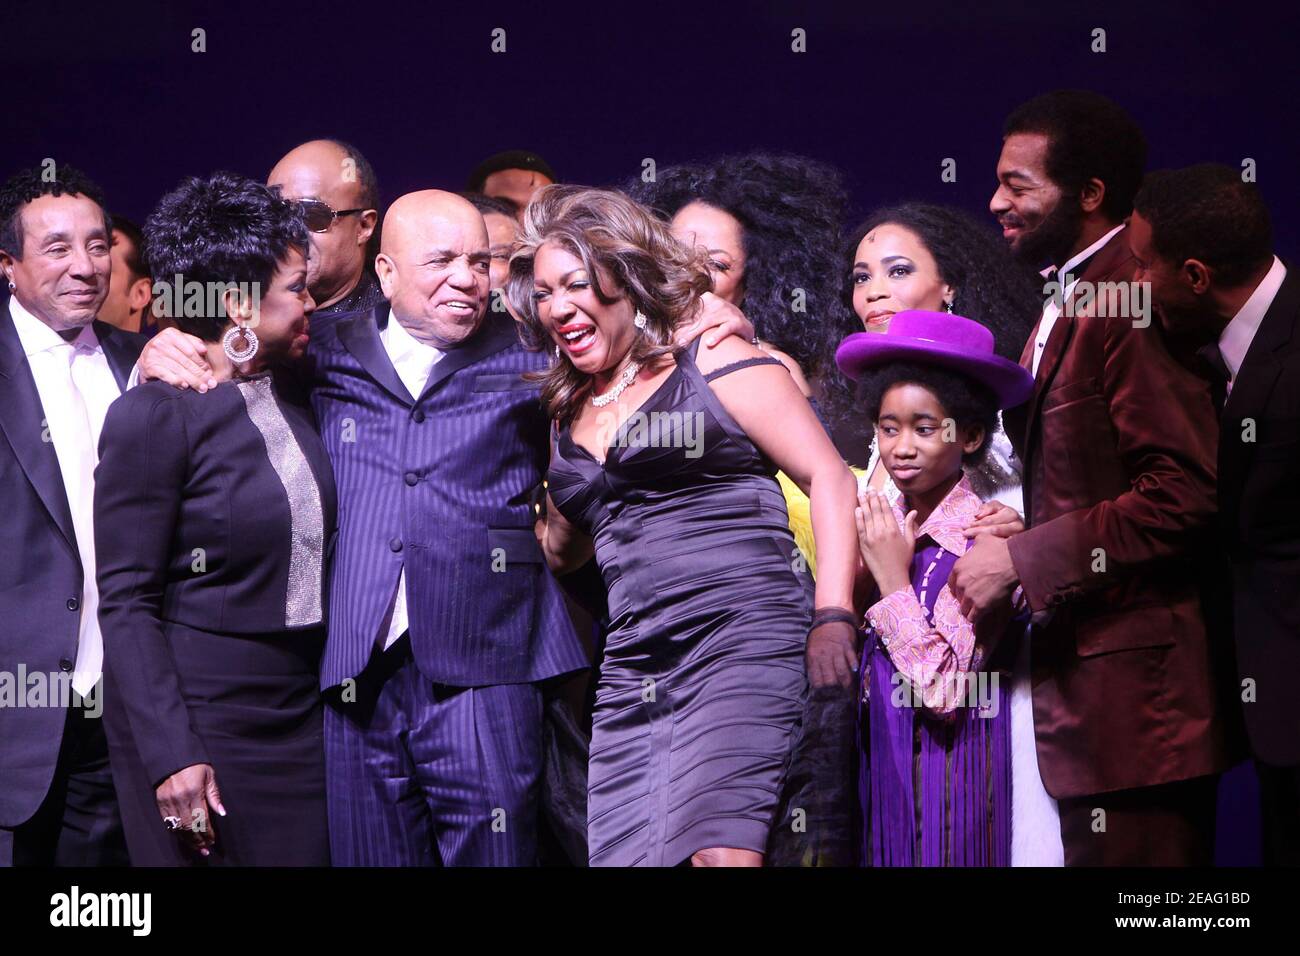 NEW YORK, NY- APRIL 14: Smokey Robinson, Gladys Knight, Stevie Wonder, Berry Gordy, Mary Wilson, Diana Ross, Valisia LeKae, Raymond Luke Jr., and Brandon Victor Dixon during the opening night curtain call for Motown, held at the Lunt-Fontanne Theatre, on April 14, 2013, in New York City. Credit: Joseph Marzullo/MediaPunch Stock Photo